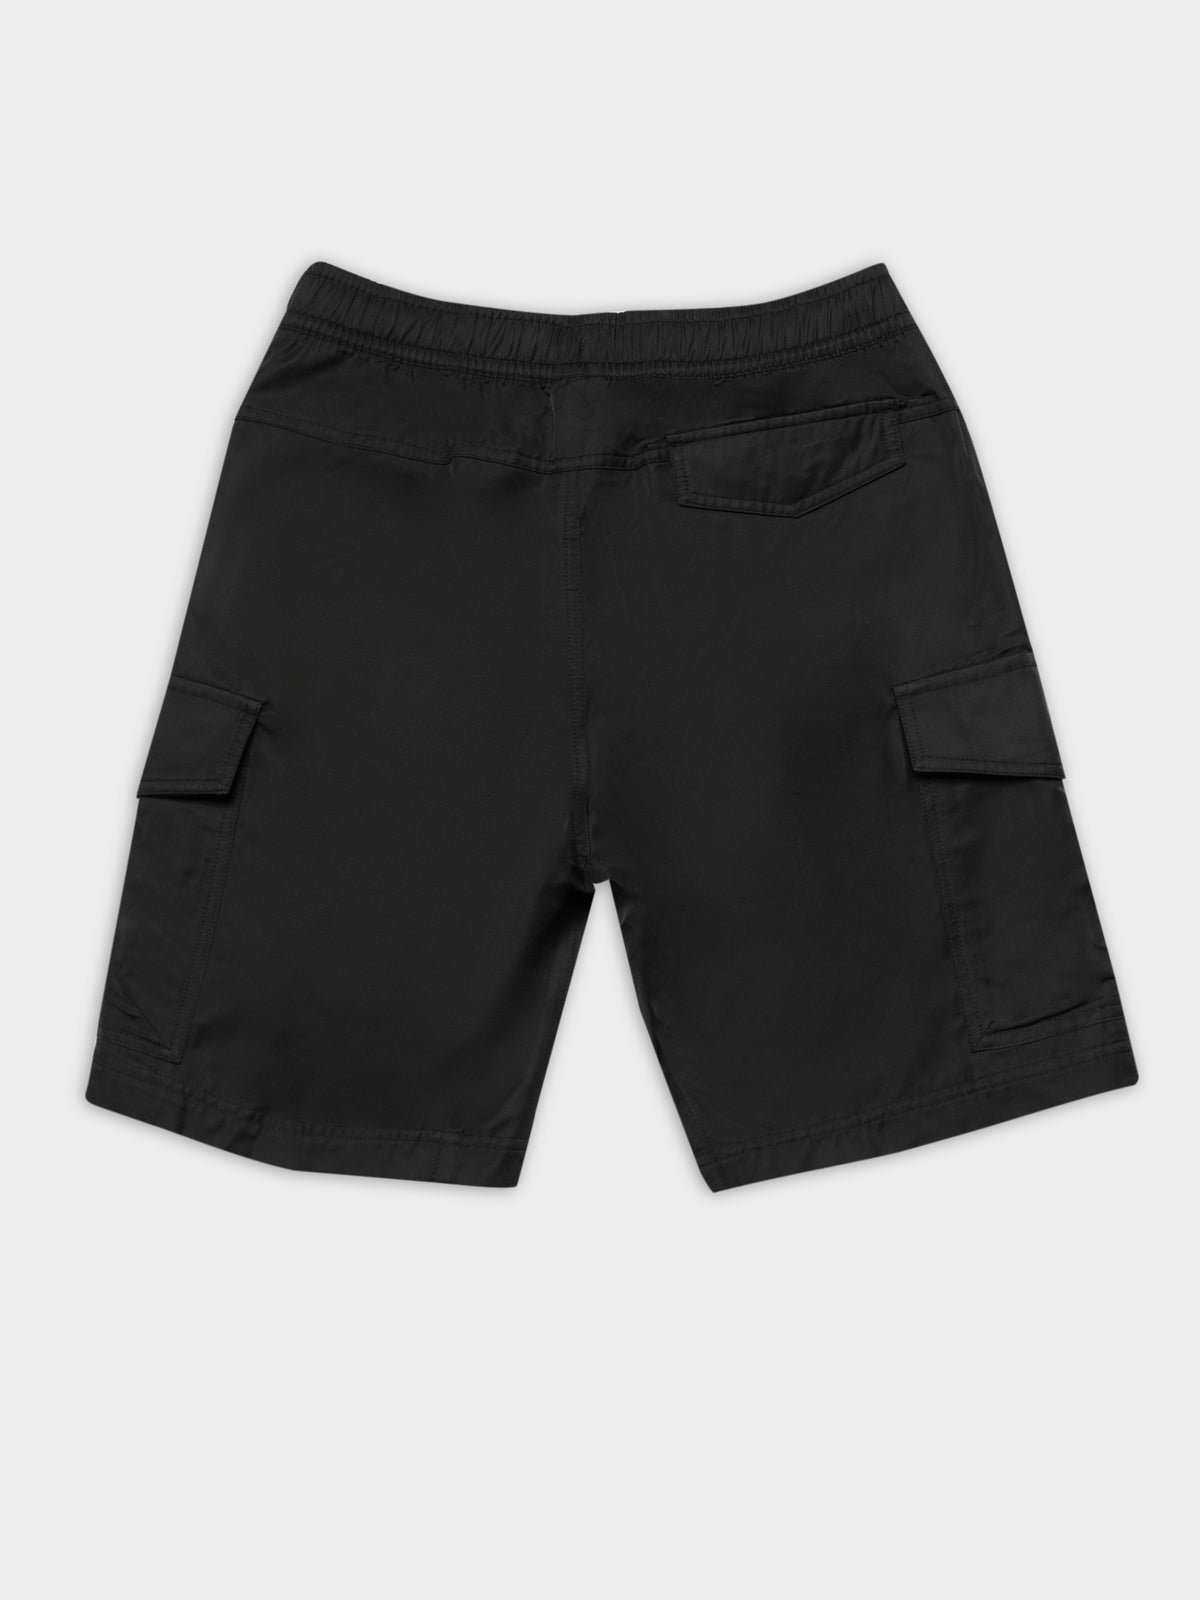 NSW Woven Utility Shorts in Black